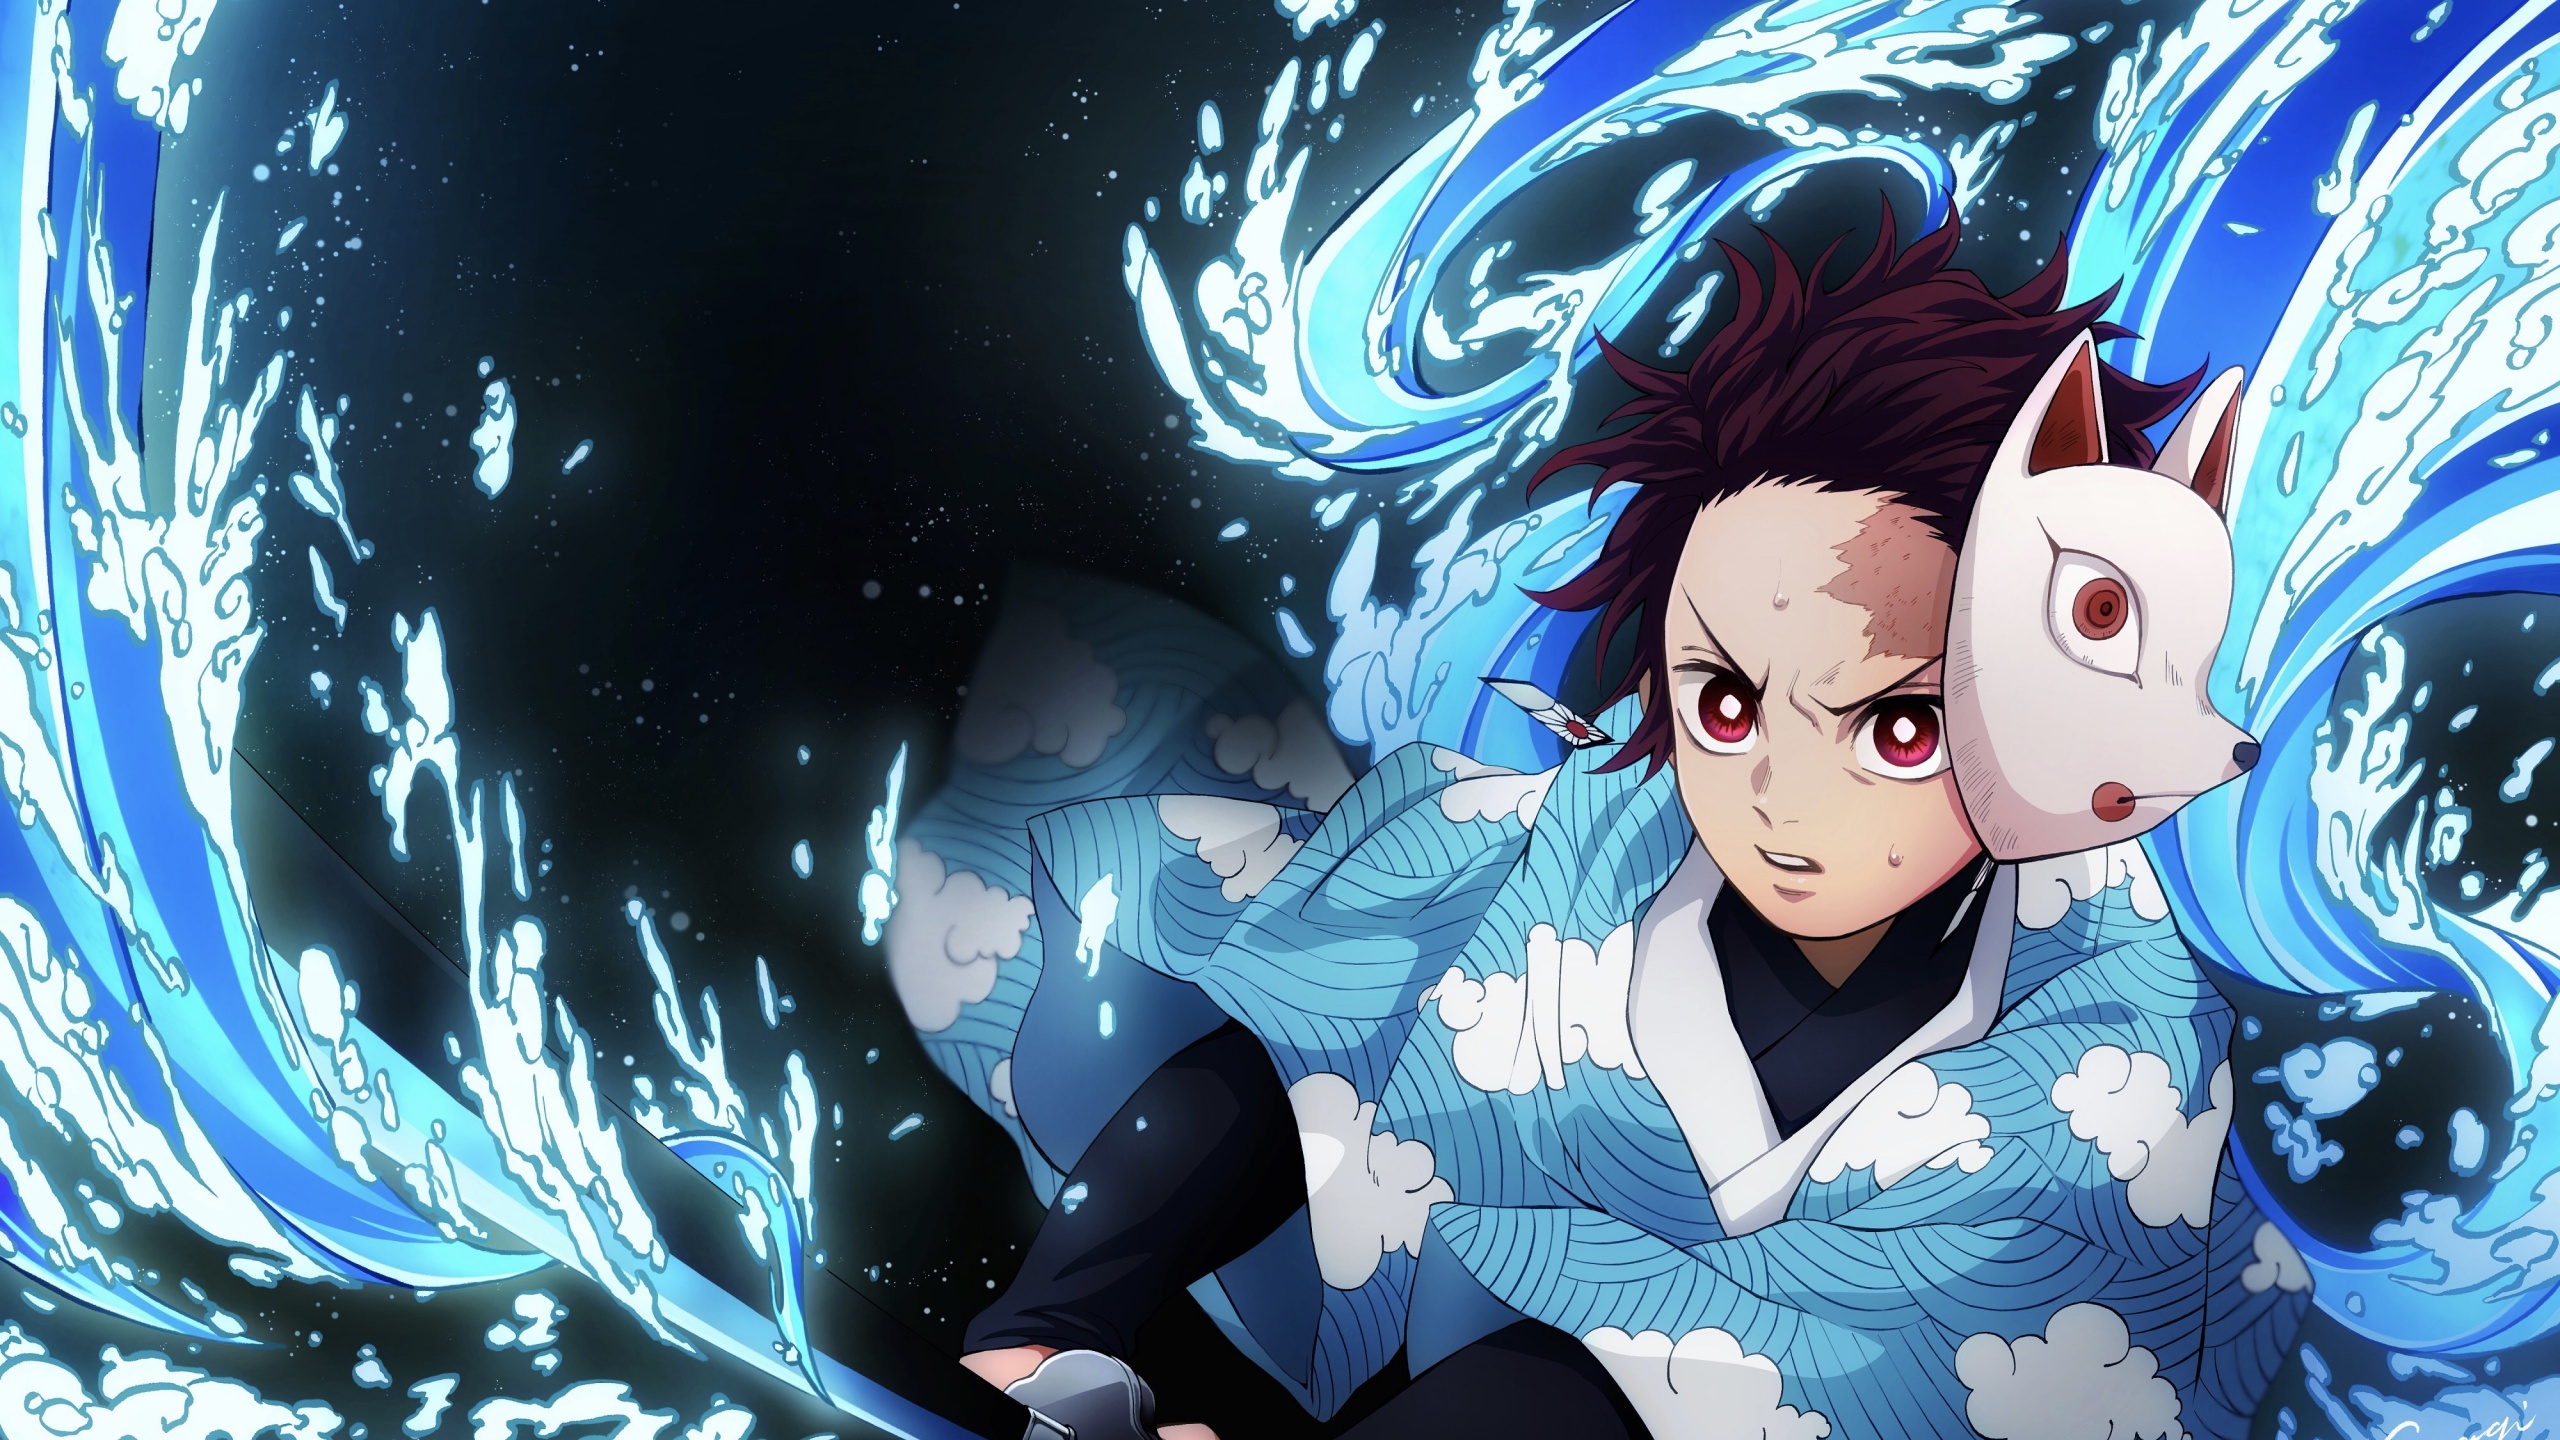 Demon Slayer Tanjiro Kamado With Sword With Blue Background 4K 8K HD Anime  Wallpapers, HD Wallpapers